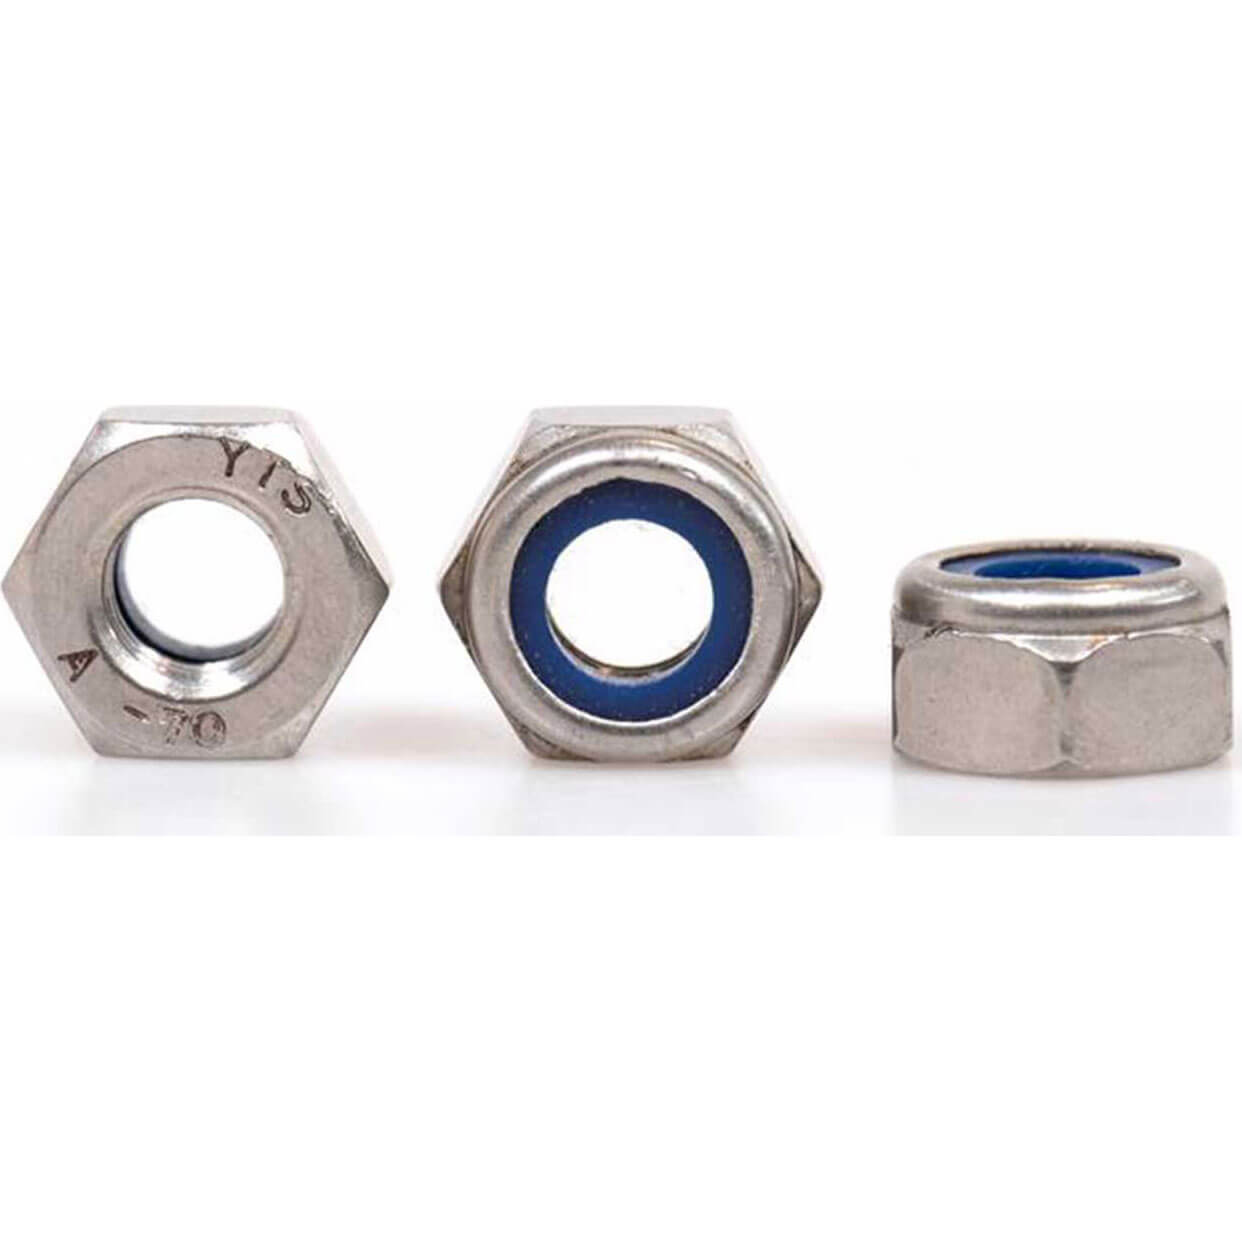 Image of Sirius A4 316 Stainless Steel Nyloc Nuts M8